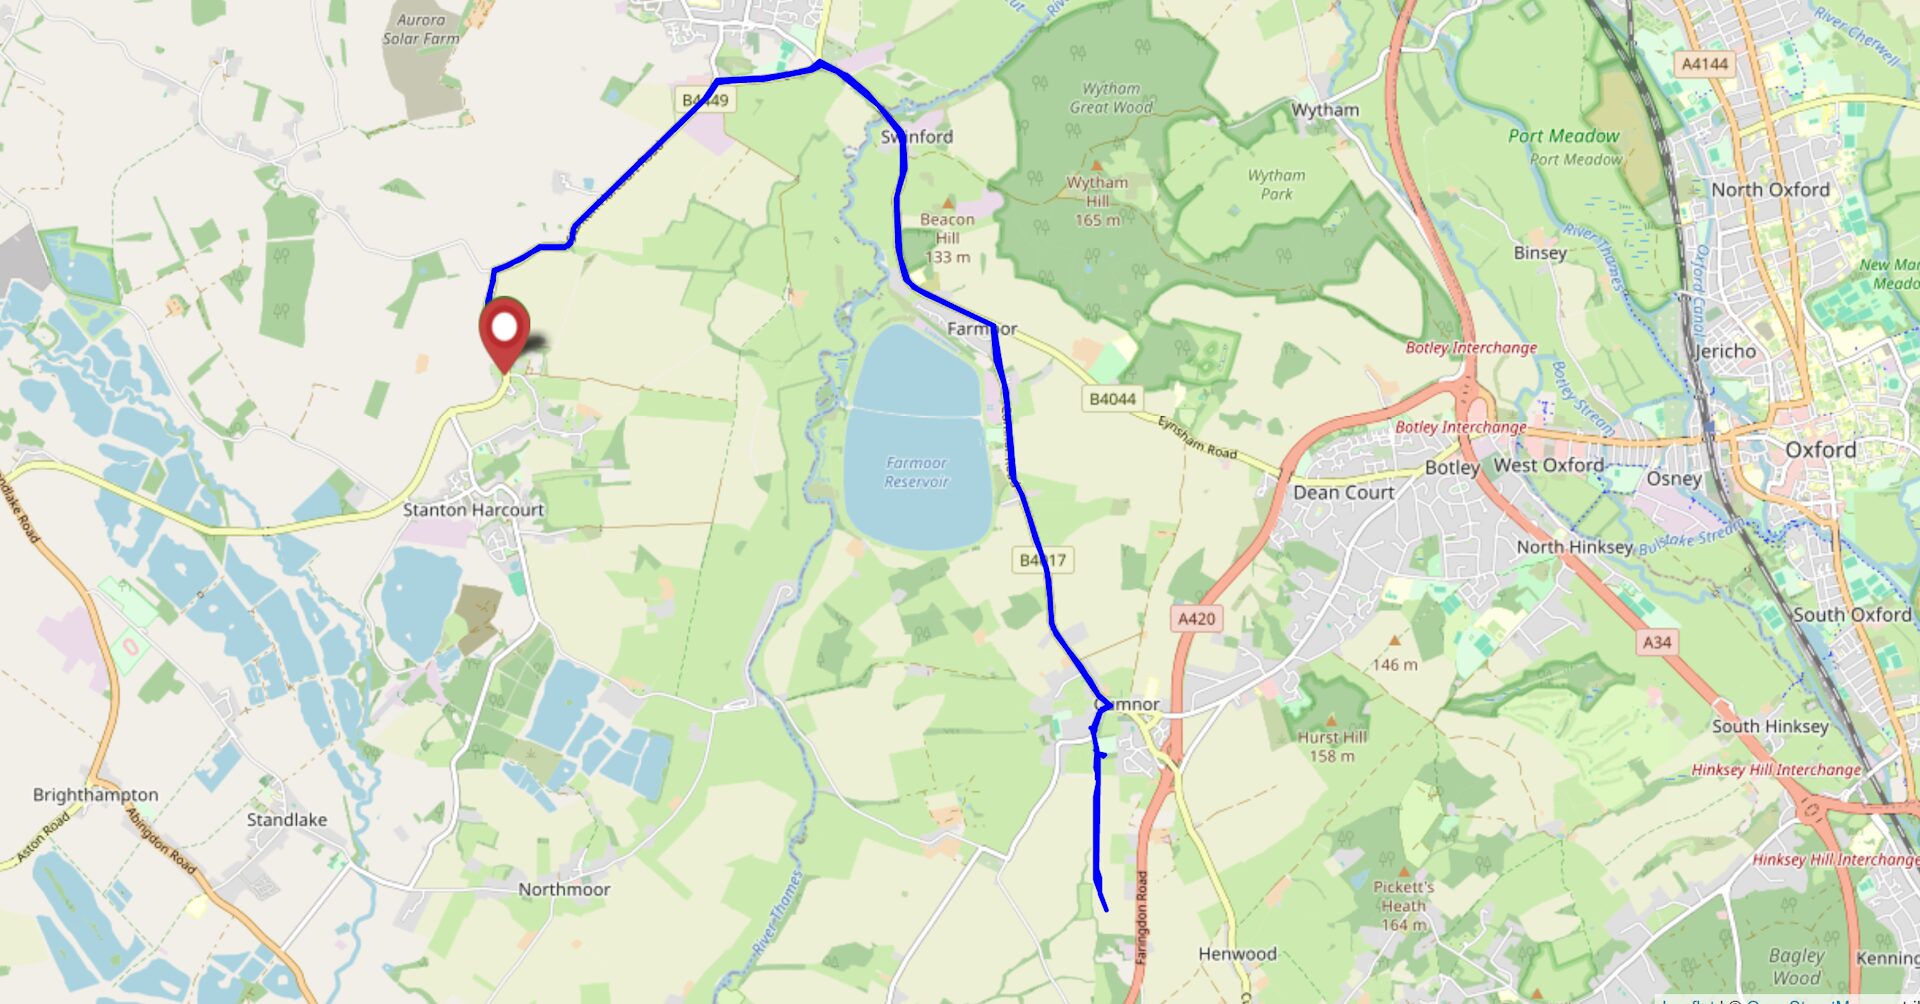 Map showing a route from Sutton, Stanton Harcourt, over the Swinford Toll Bridge, South into Cumnor, and then out into some fields South of that.